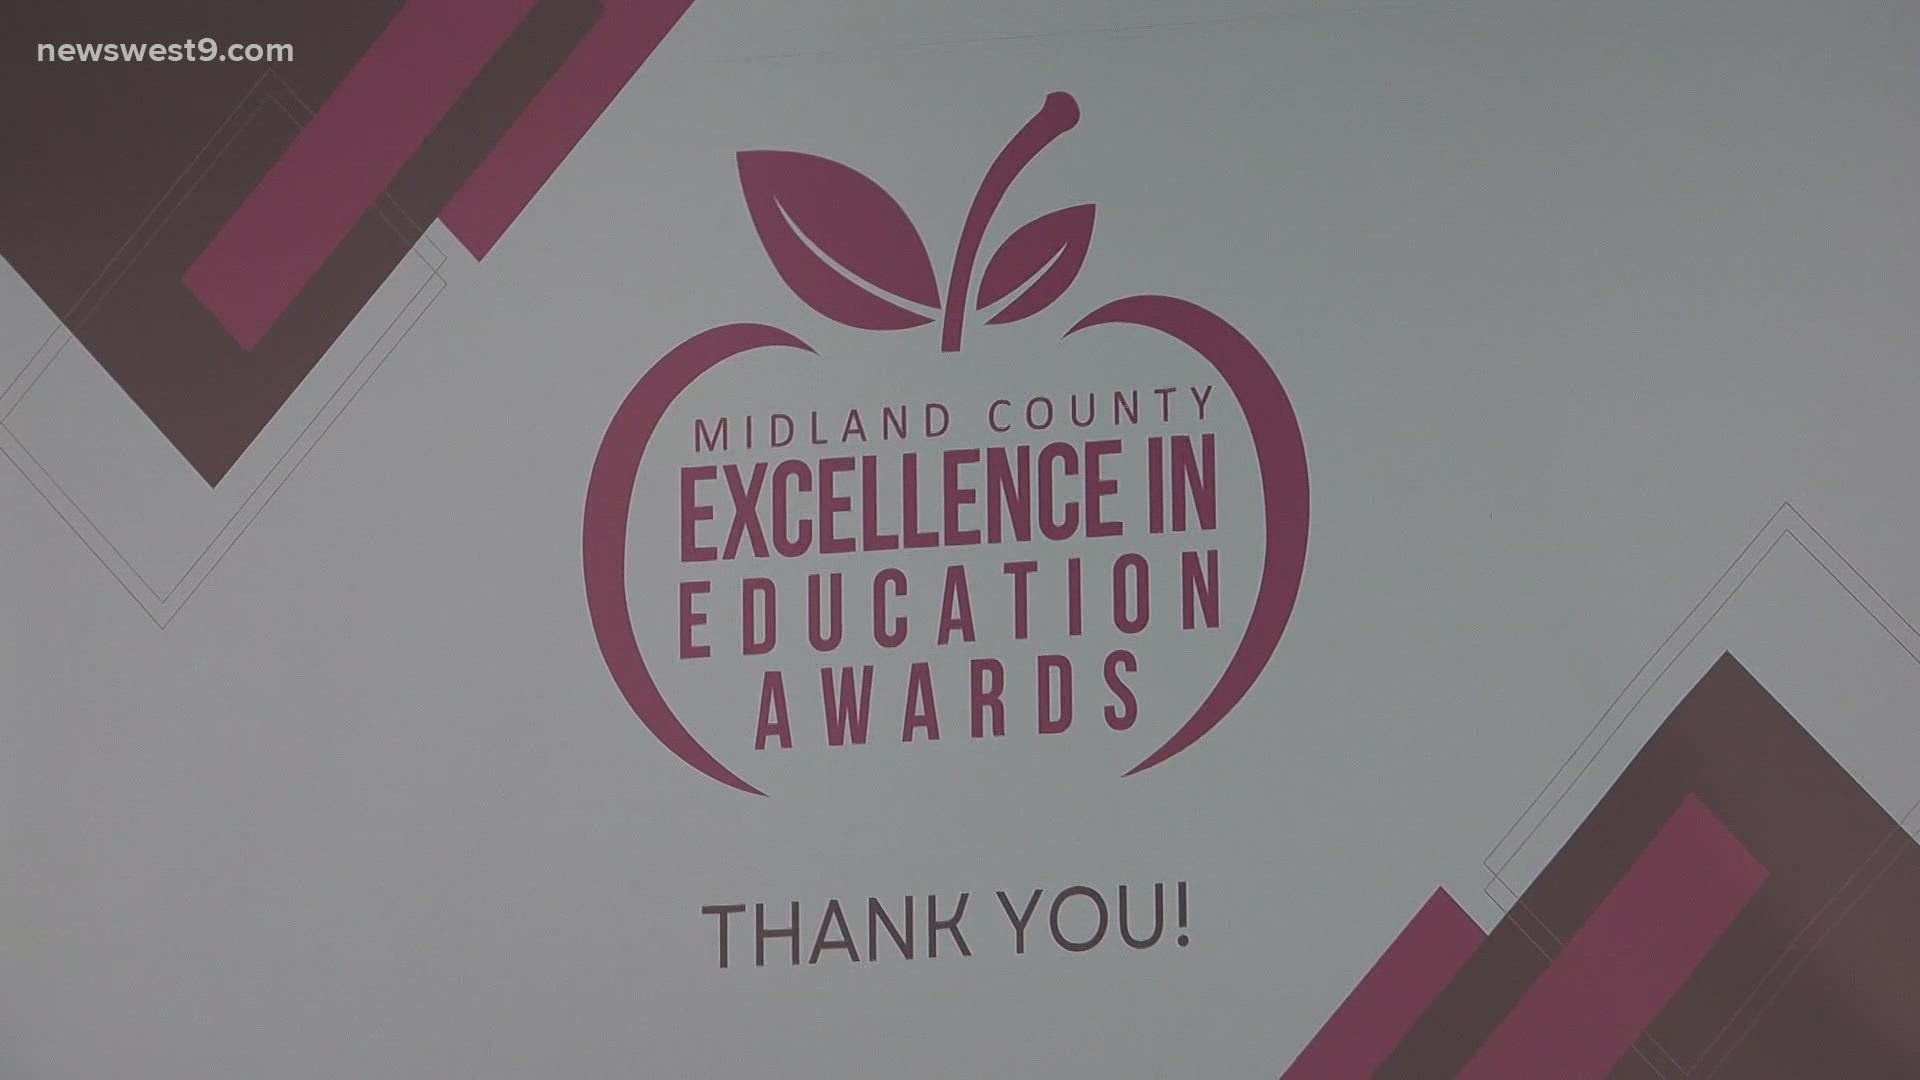 The event handed out awards for teachers of the year as well as campus of the year.